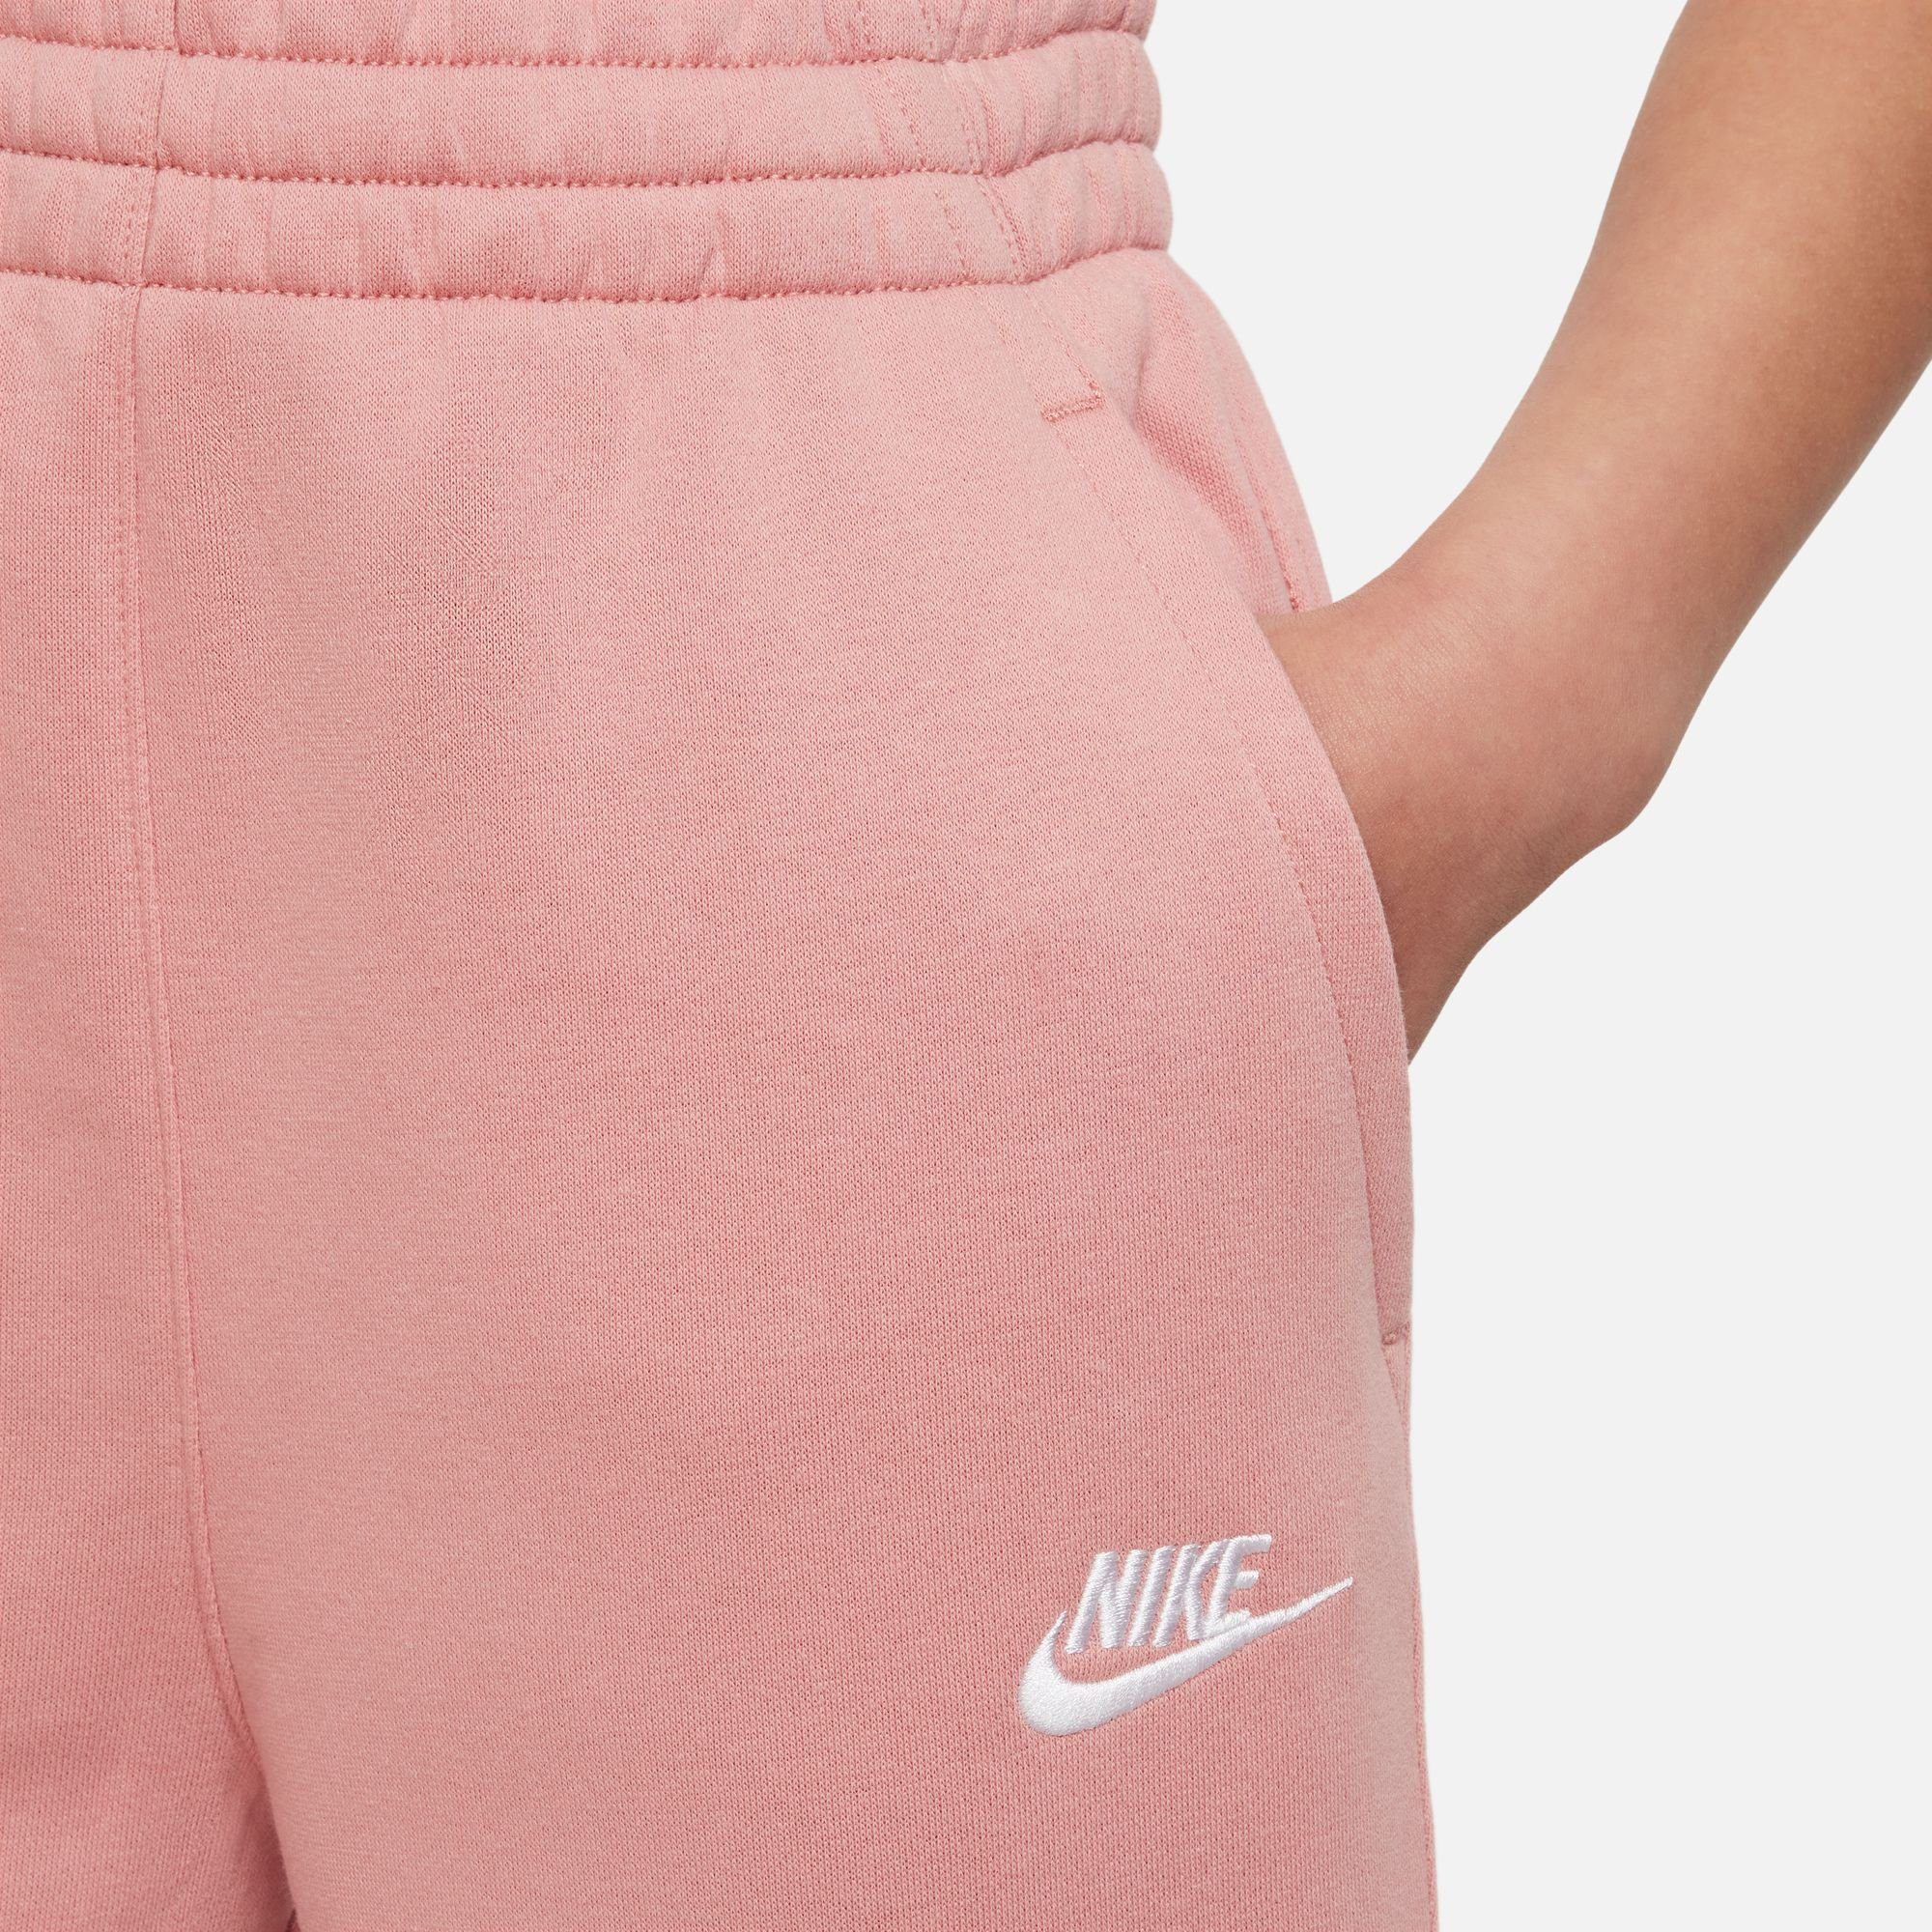 Nike KIDS' PANTS HIGH-WAISTED RED (GIRLS) Sportswear CLUB BIG FLEECE STARDUST/RED Jogginghose STARDUST/WHITE FITTED